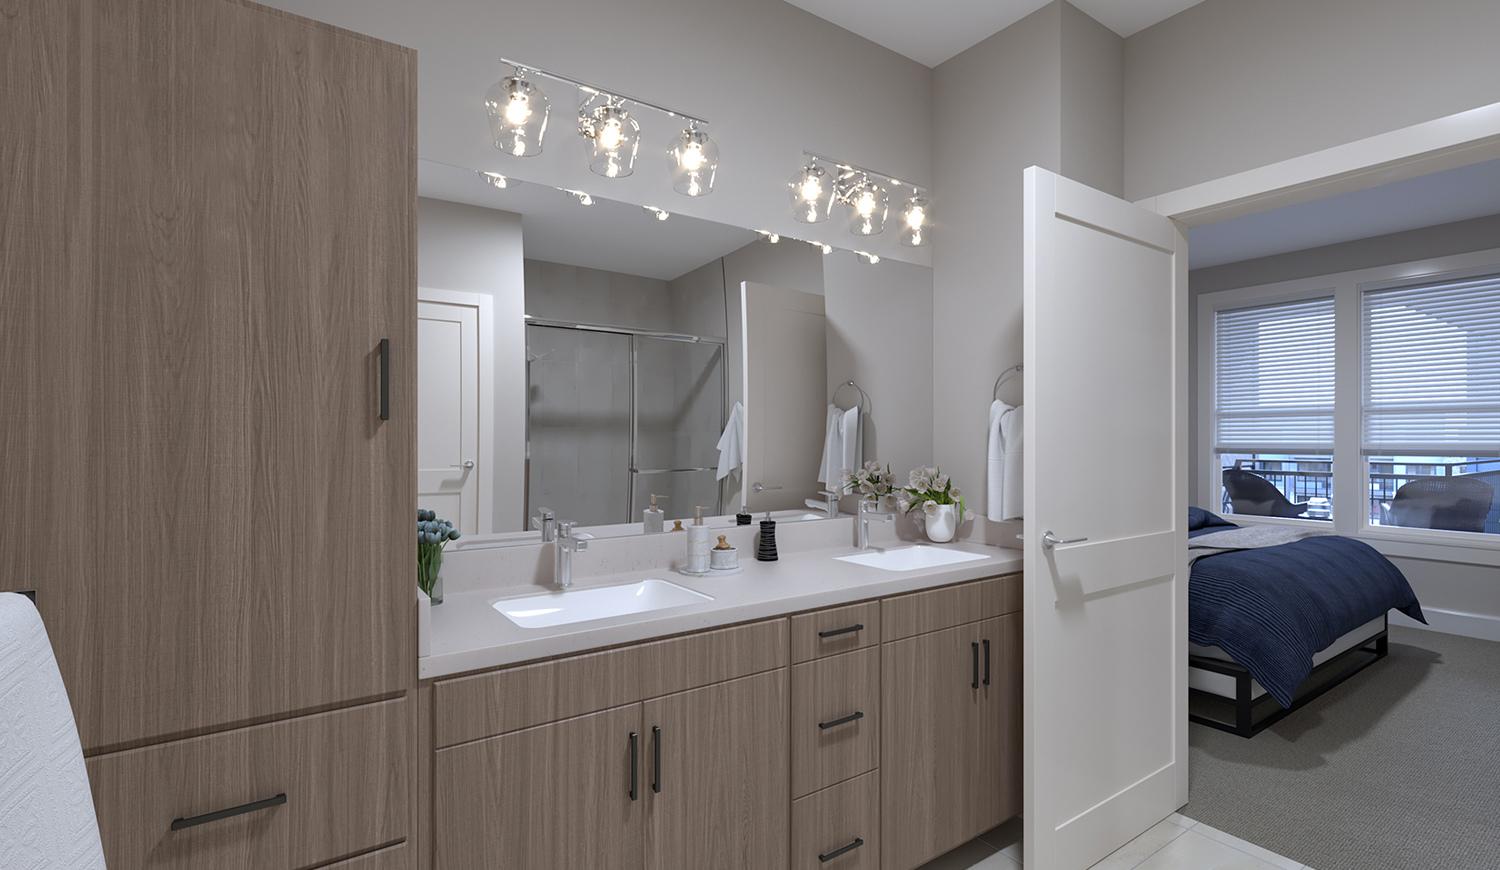 Atlee Square luxury apartment's bathroom in Langhorne, PA, featuring a quartz vanity & wooden shelevs, & door leading to the bedroom.